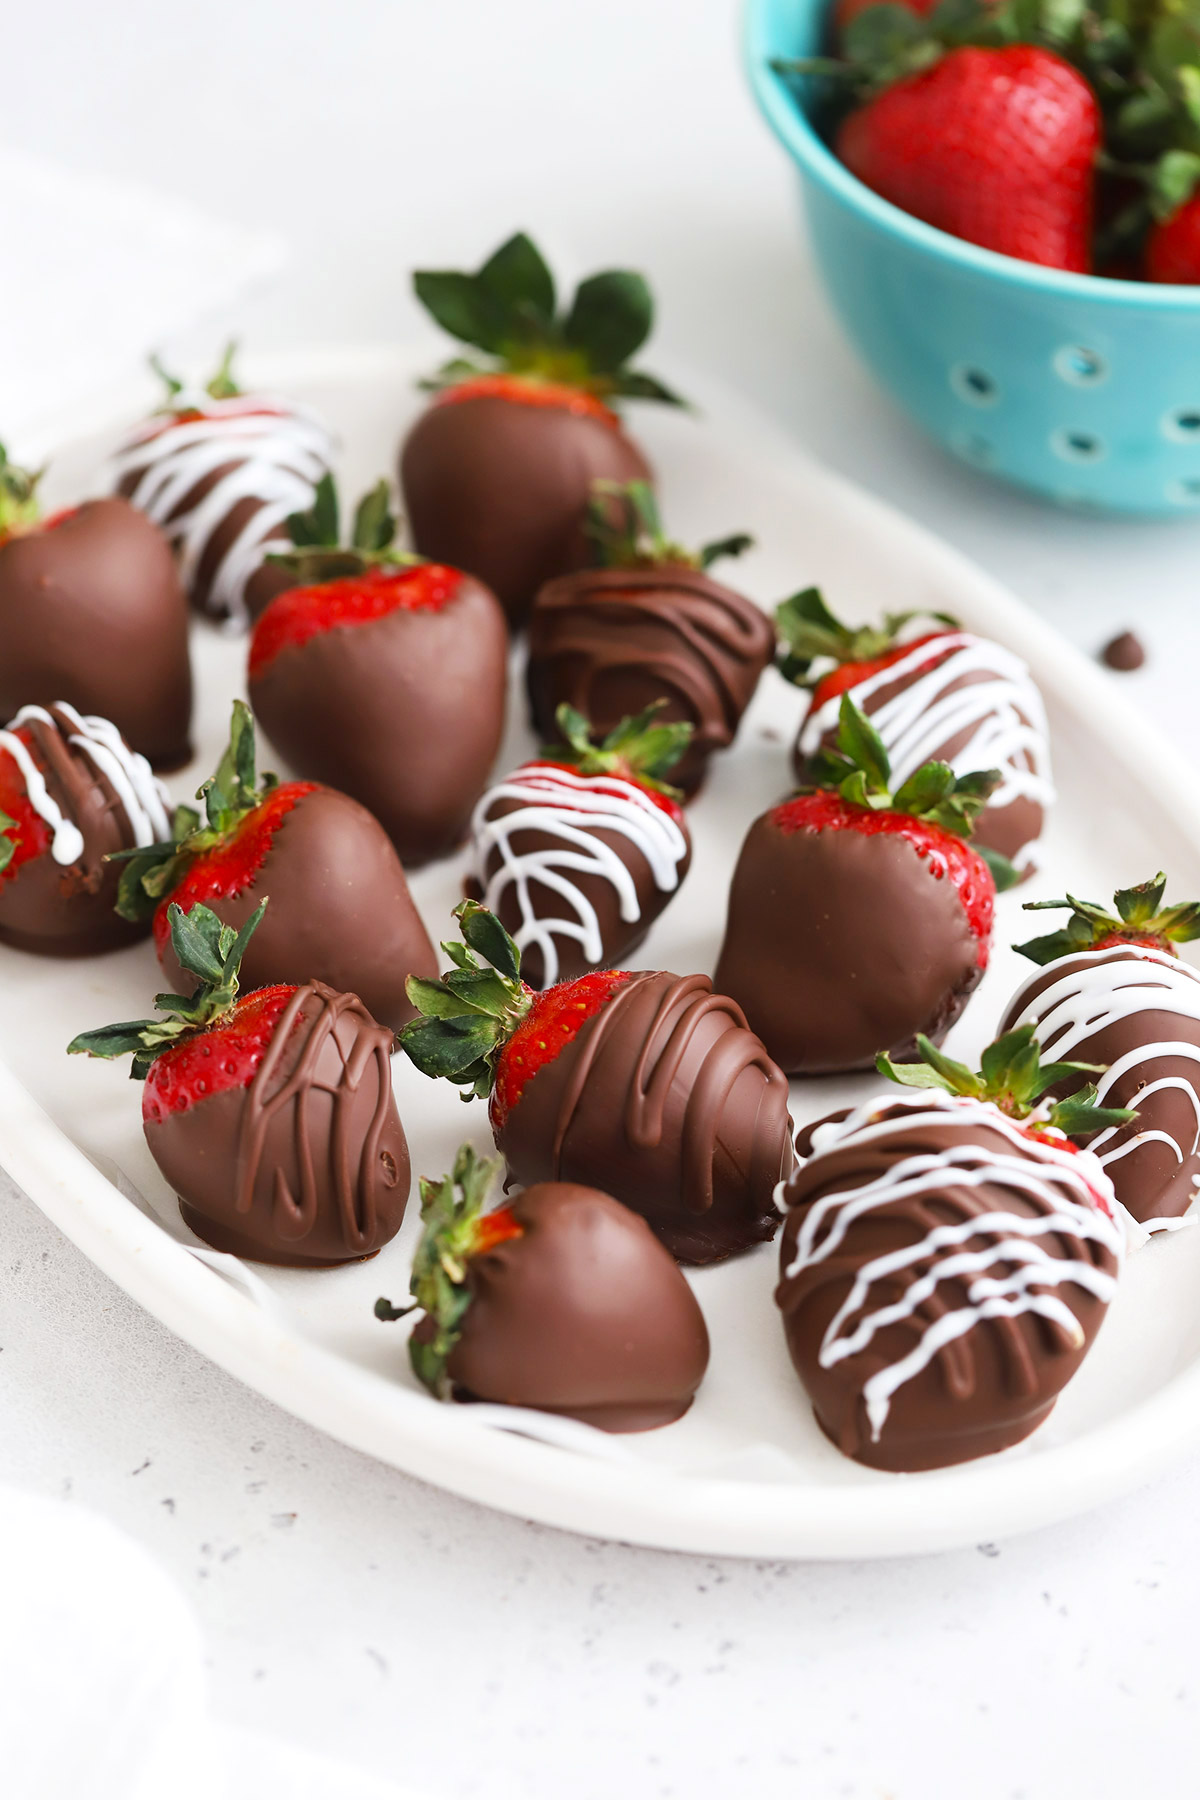 Front view of vegan chocolate-covered strawberries on a white oval plate